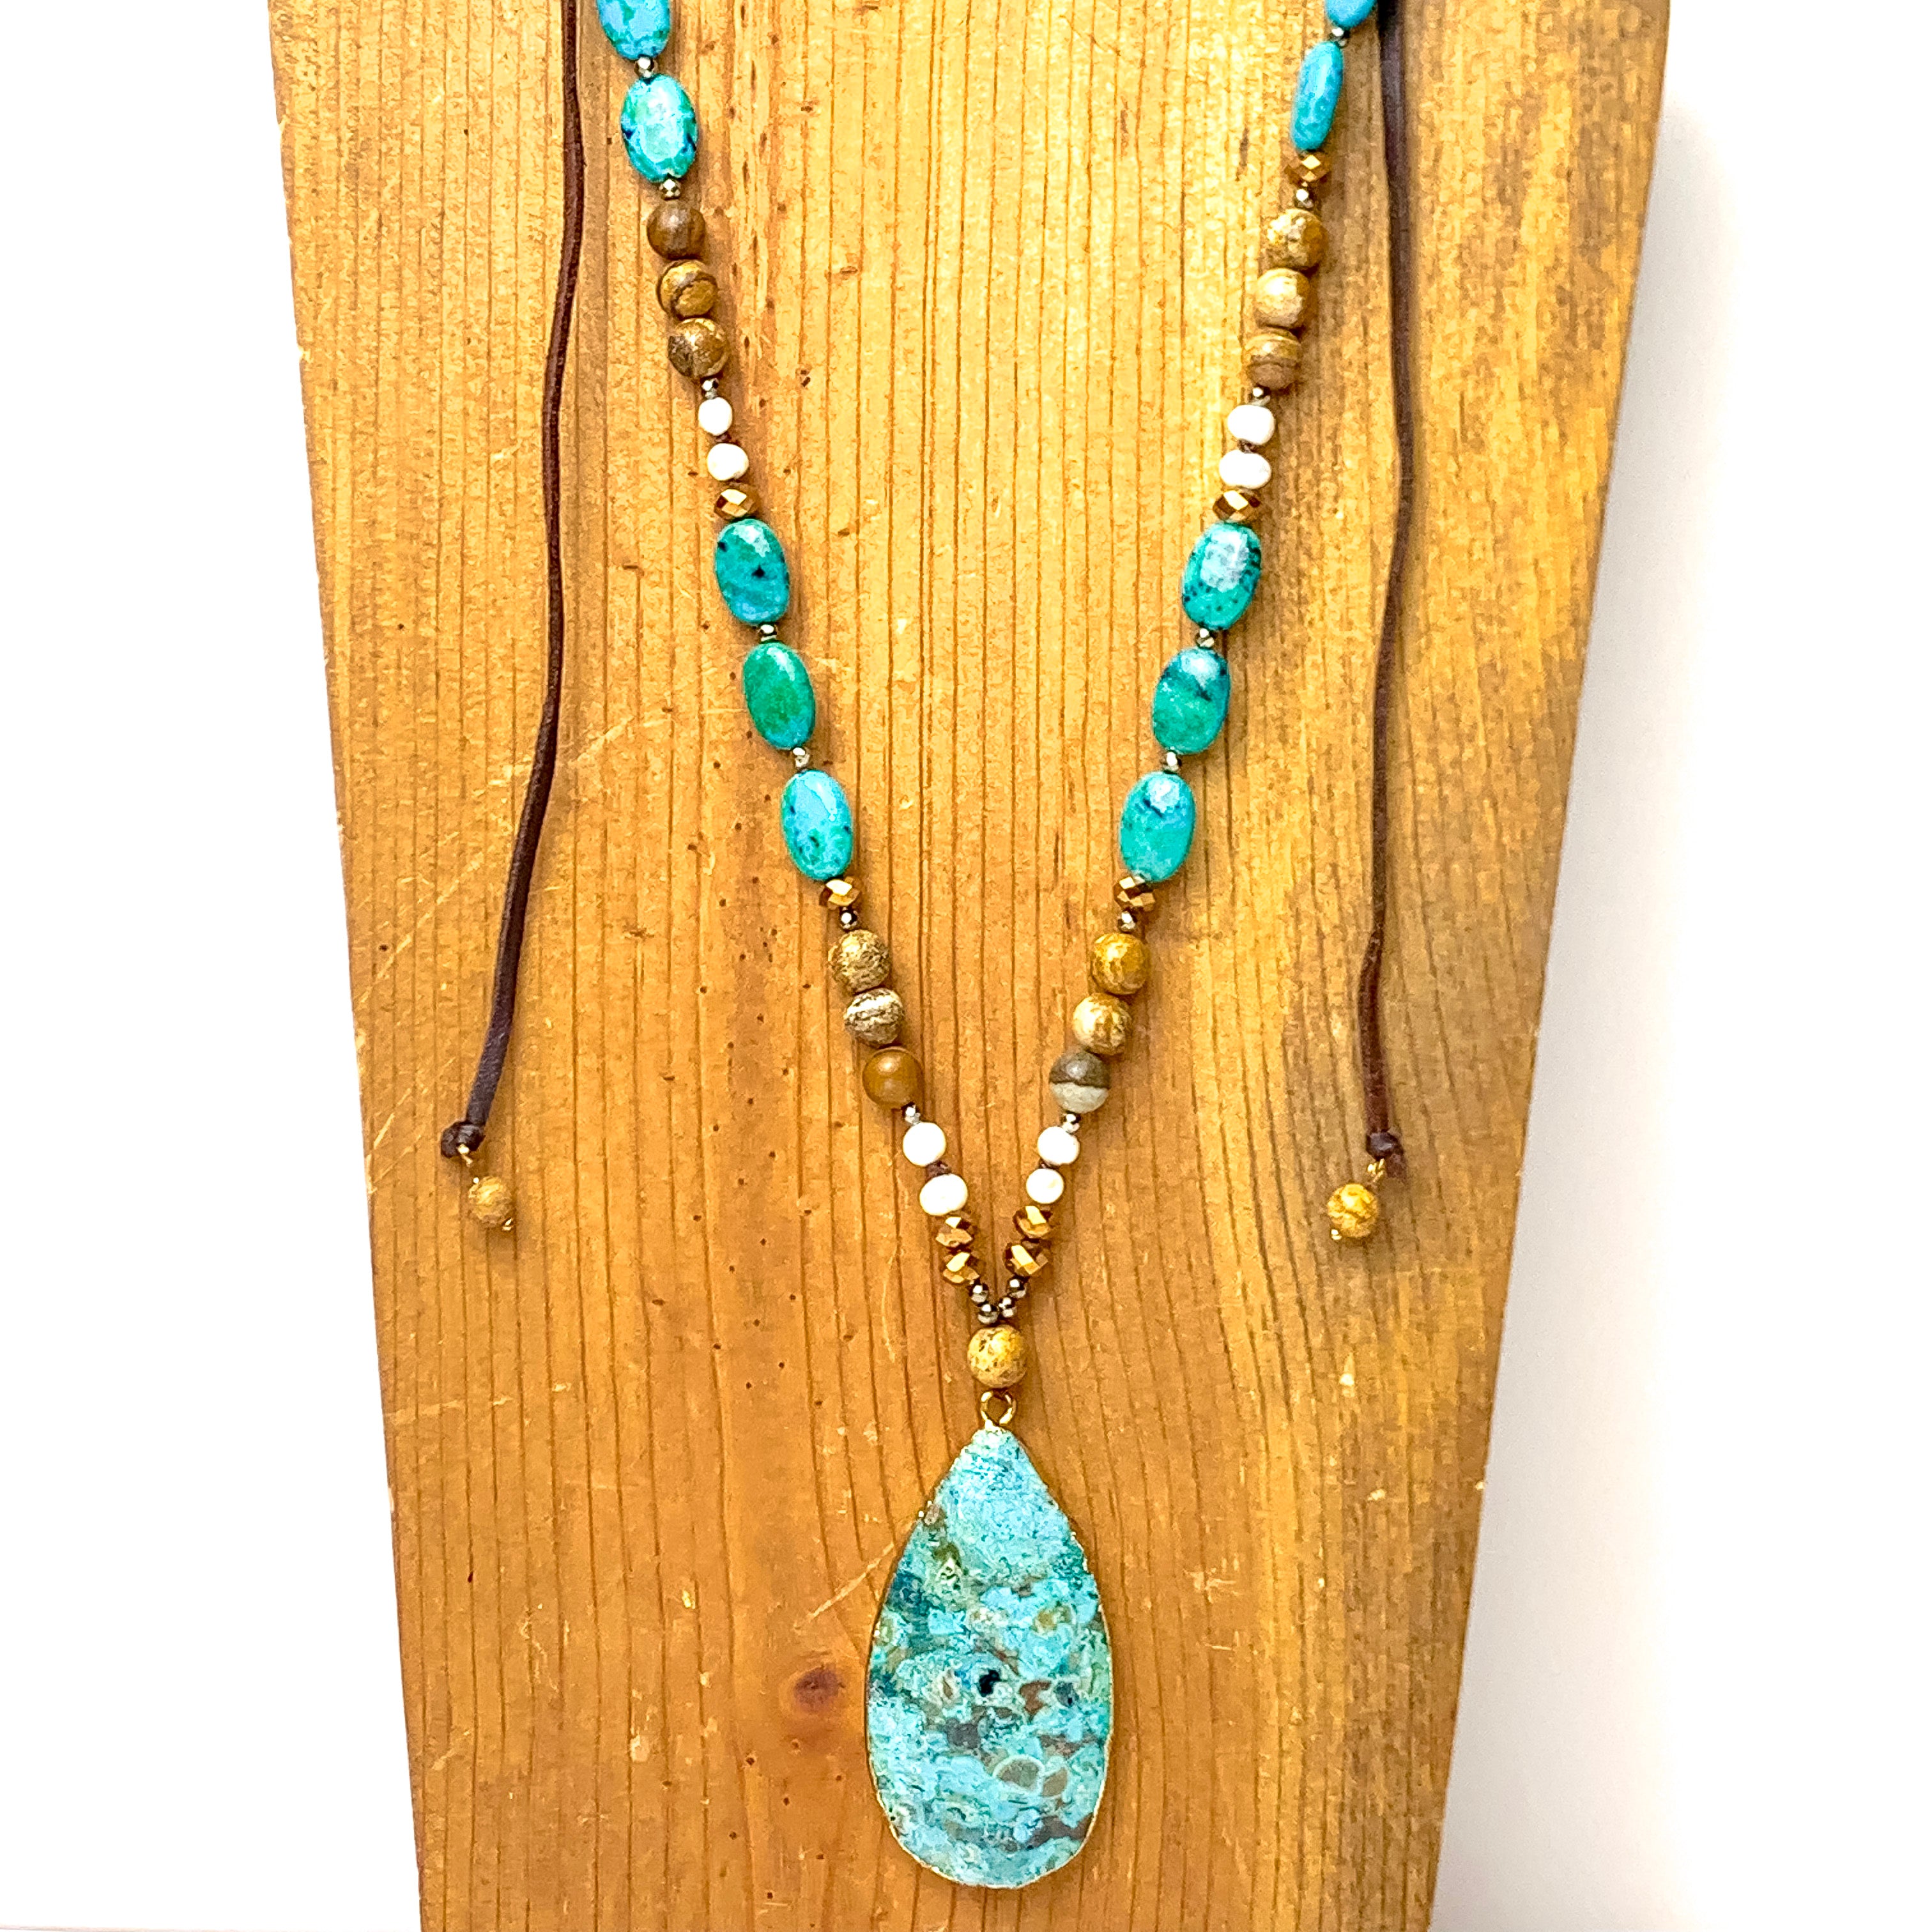 Bohemian Sunset Beaded Necklace with Faux Turquoise Teardrop Pendant - Giddy Up Glamour Boutique